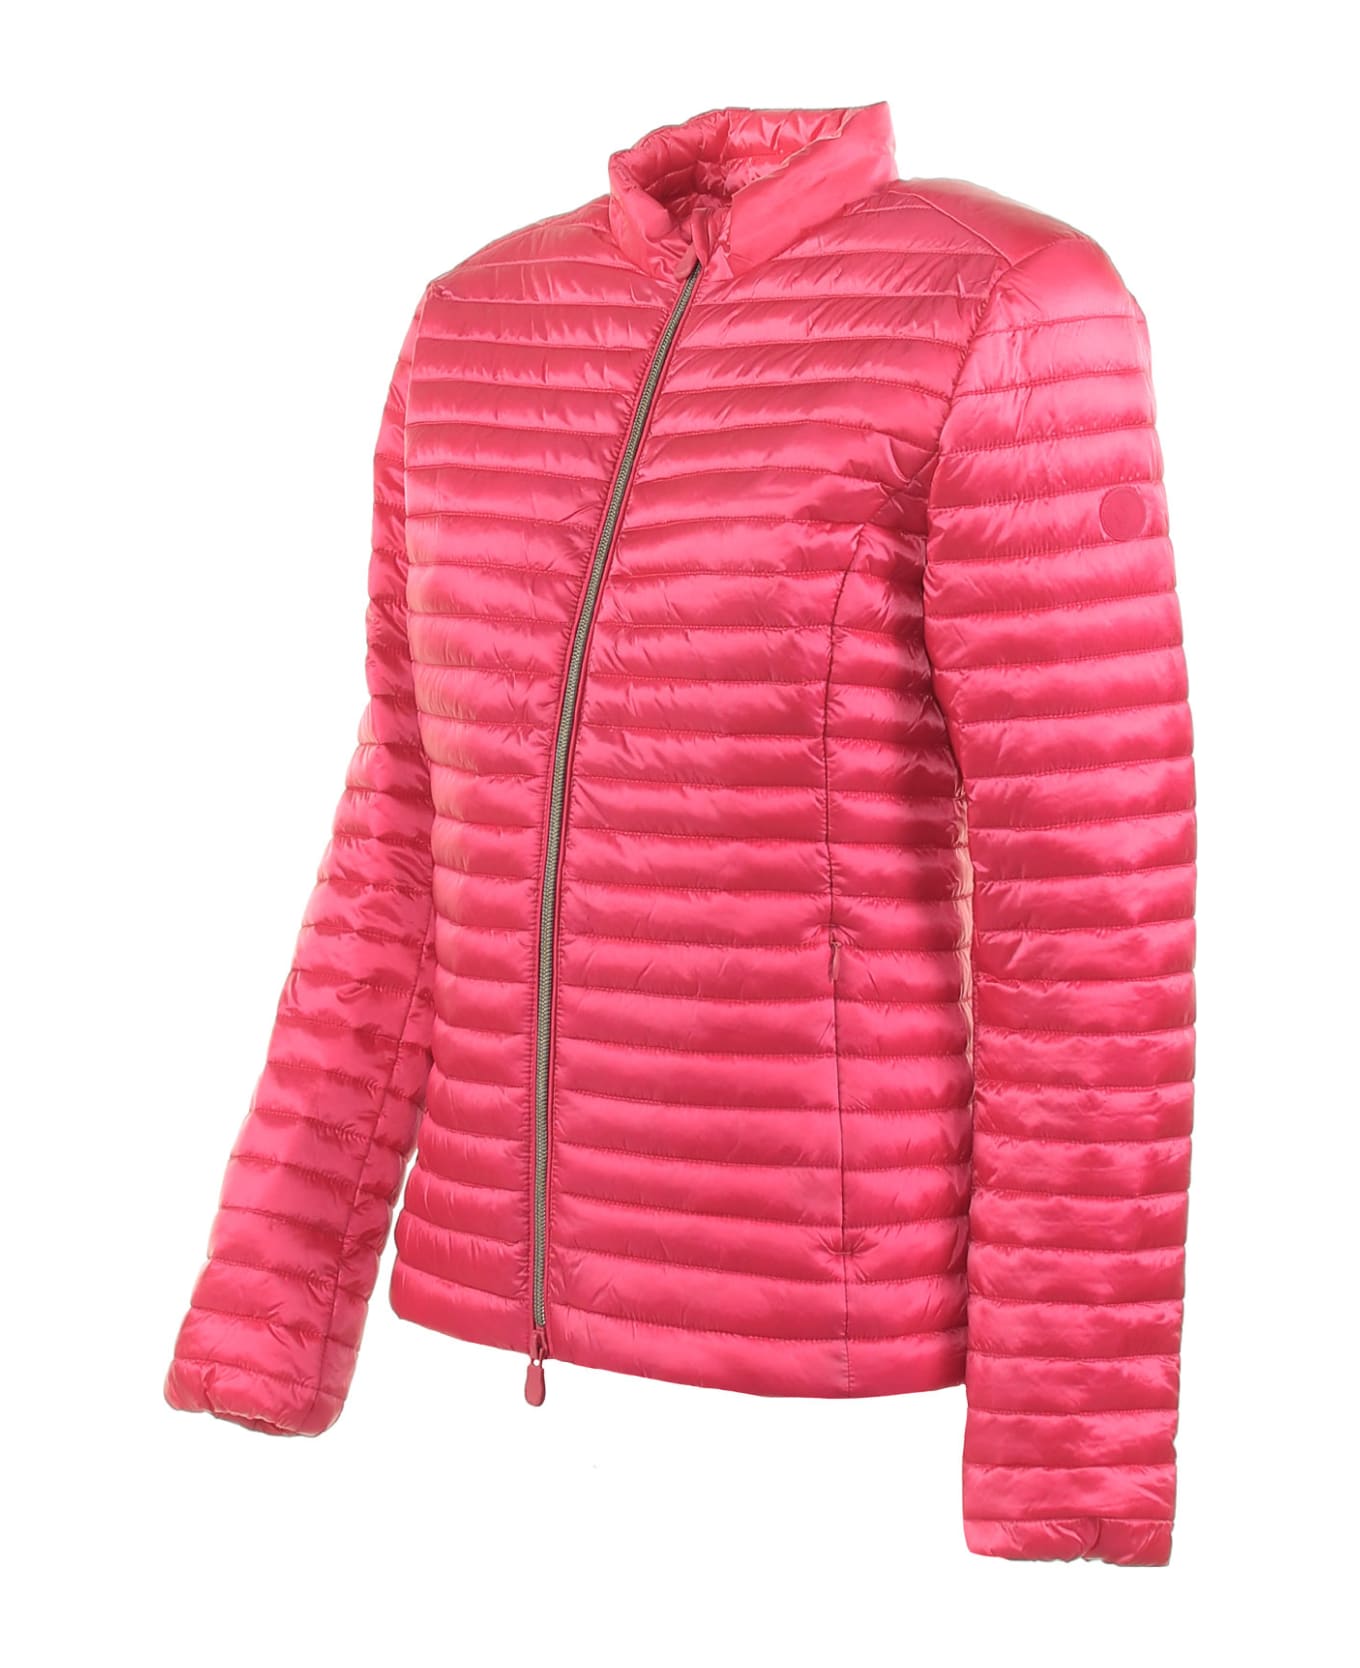 Save the Duck Pearly Pink Quilted Jacket - PINK ダウンジャケット